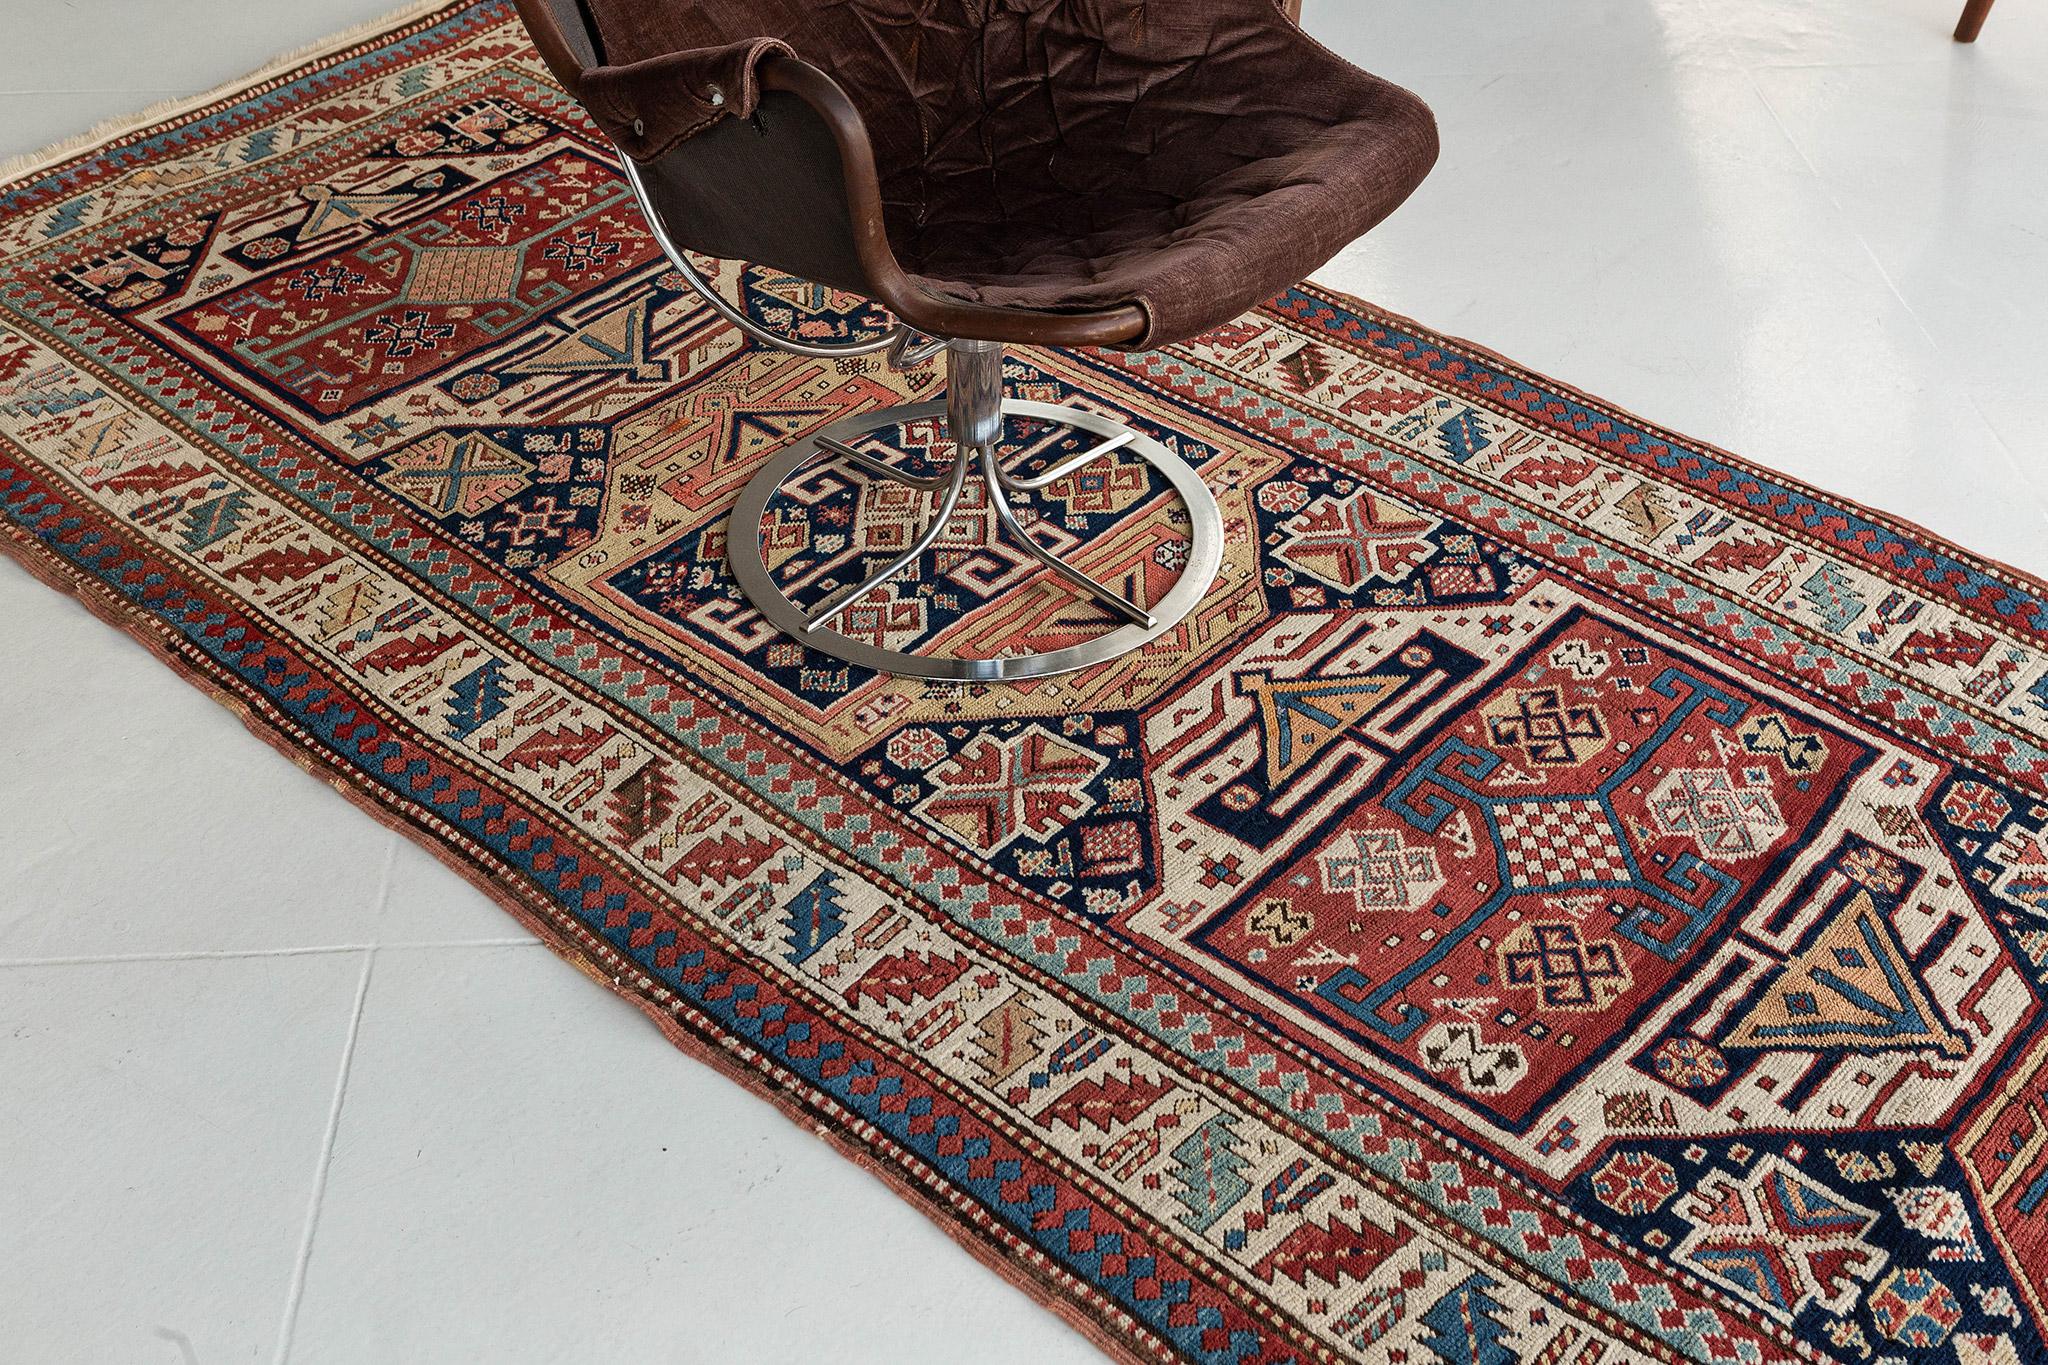 Our traditional Russian Kazak runner vintage rug is inspired by tribal patterns. This hallway rug is a deal for flooring or wall applications. It is embellished with motifs and Russian tribal symbols and surrounded by geometrical patterns that make